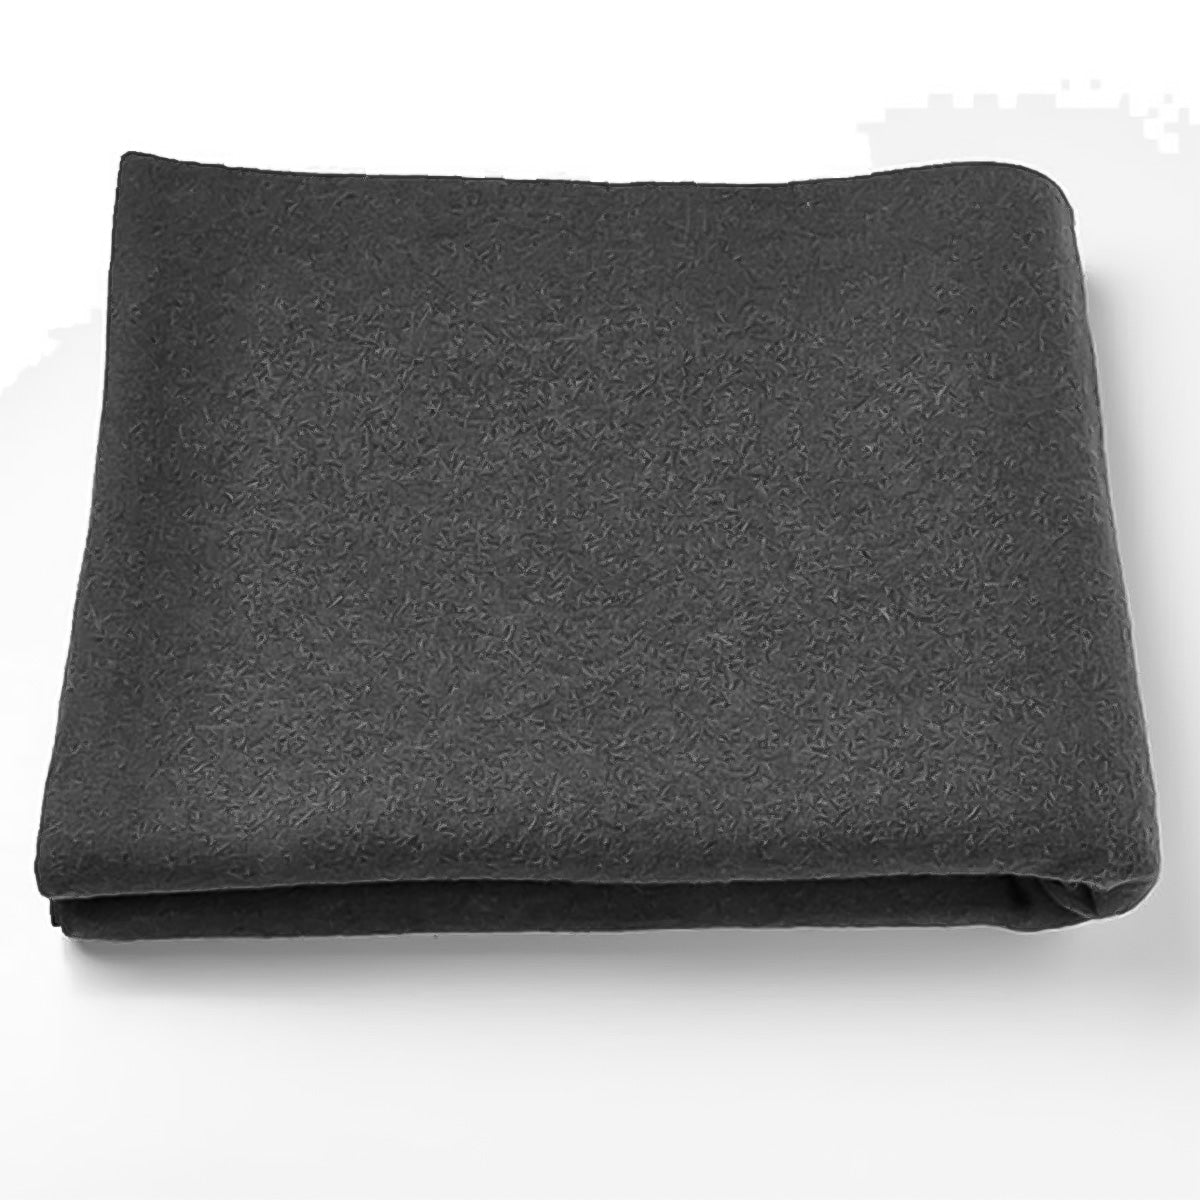 Wool Personal Protection Blanket